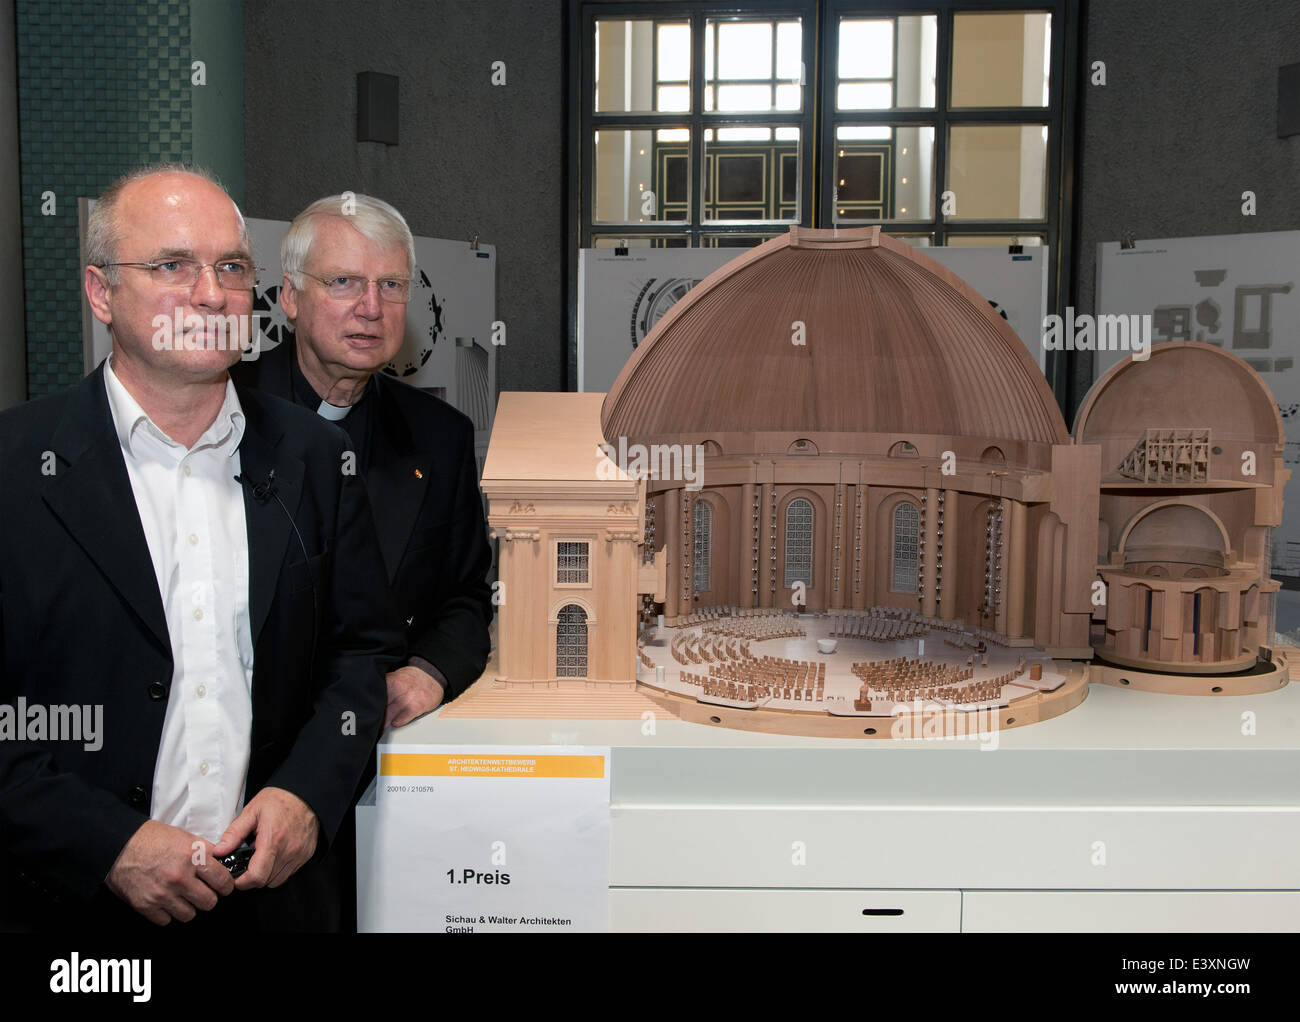 Berlin, Germany. 1st July, 2014. Prelate Ronald Rother and architect Peter Sichau (L) stand next to the winning design for the redesign of the interior of St. Hedwig's Cathedral by architect's office Sichau und Walter (Fulda) in Berlin, Germany, 01 July 2014. The winning design plans to close off the lower church, amongst other things. Photo: SOEREN STACHE/DPA/Alamy Live News Stock Photo